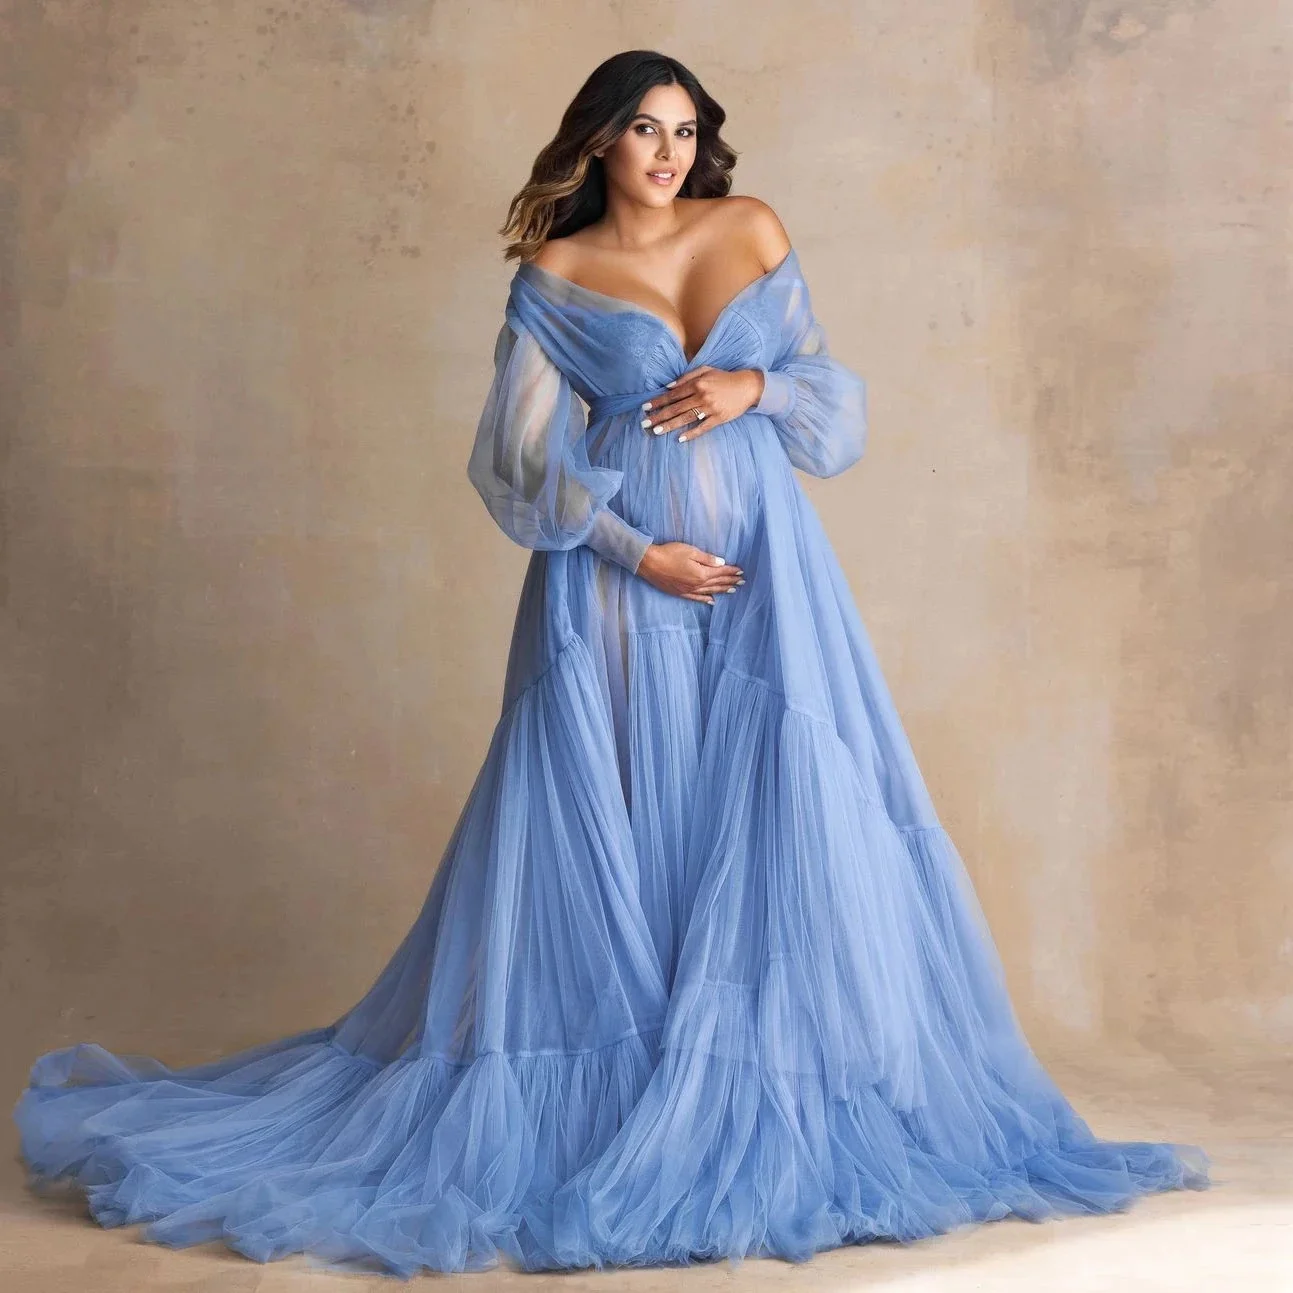 

Charming Ruffle Tulle Maternity Dress Photoshoot Off the Shoulder Blue Bridal Robes Custom Made Babyshower Grown for Photography